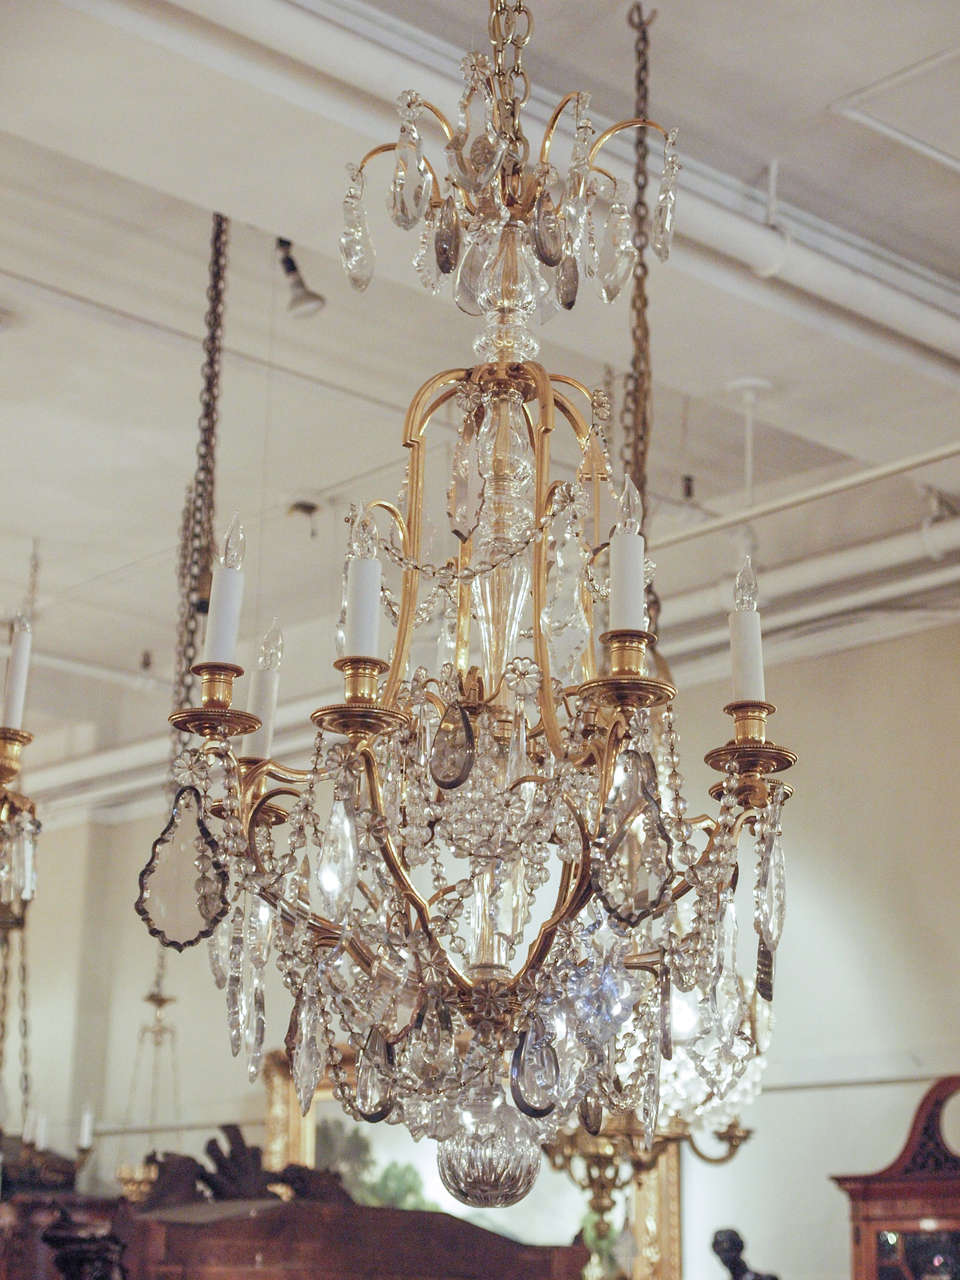 Antique exceptional quality baccarat and ormolu chandelier.